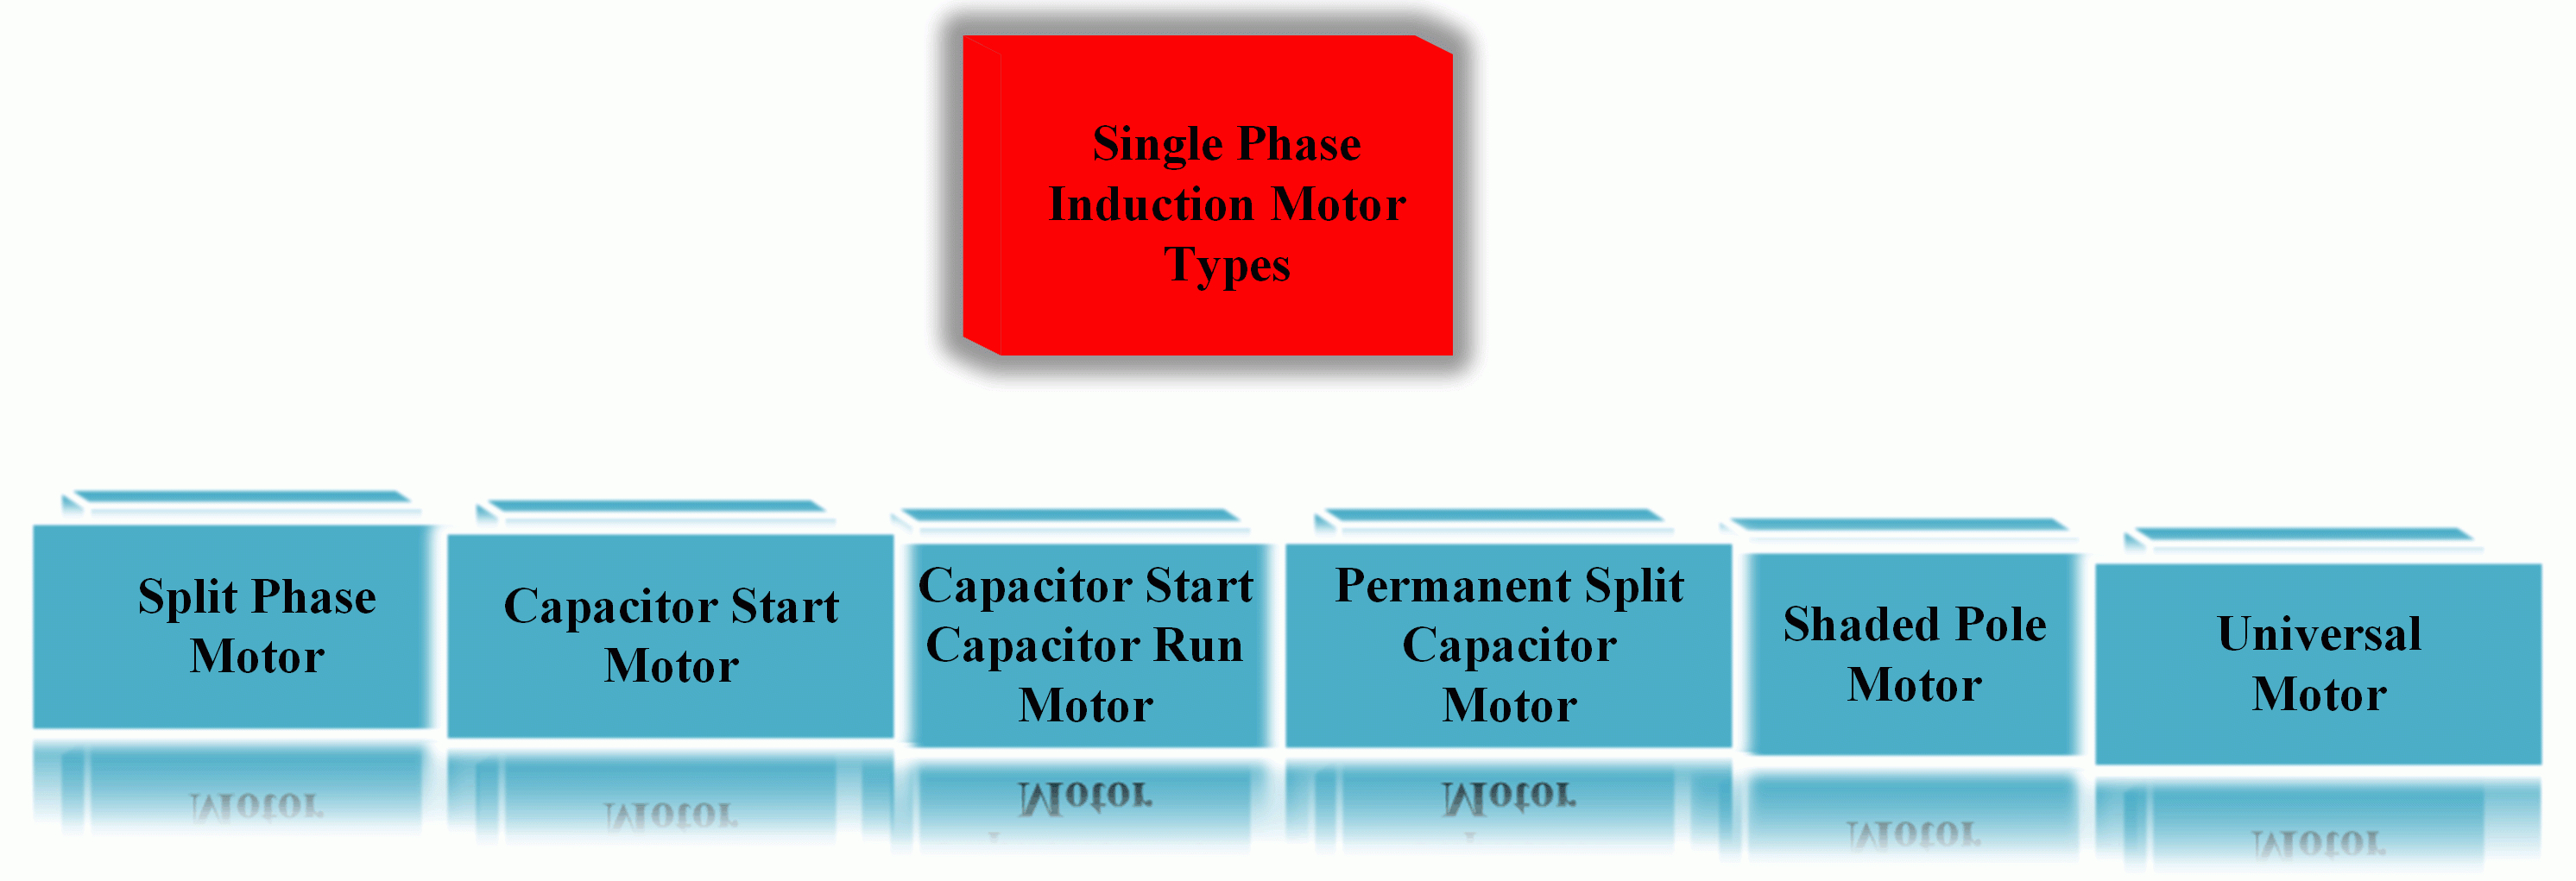 Types Of Single Phase Induction Motors | Single Phase Induction - Single Phase Motor Wiring Diagram With Capacitor Start